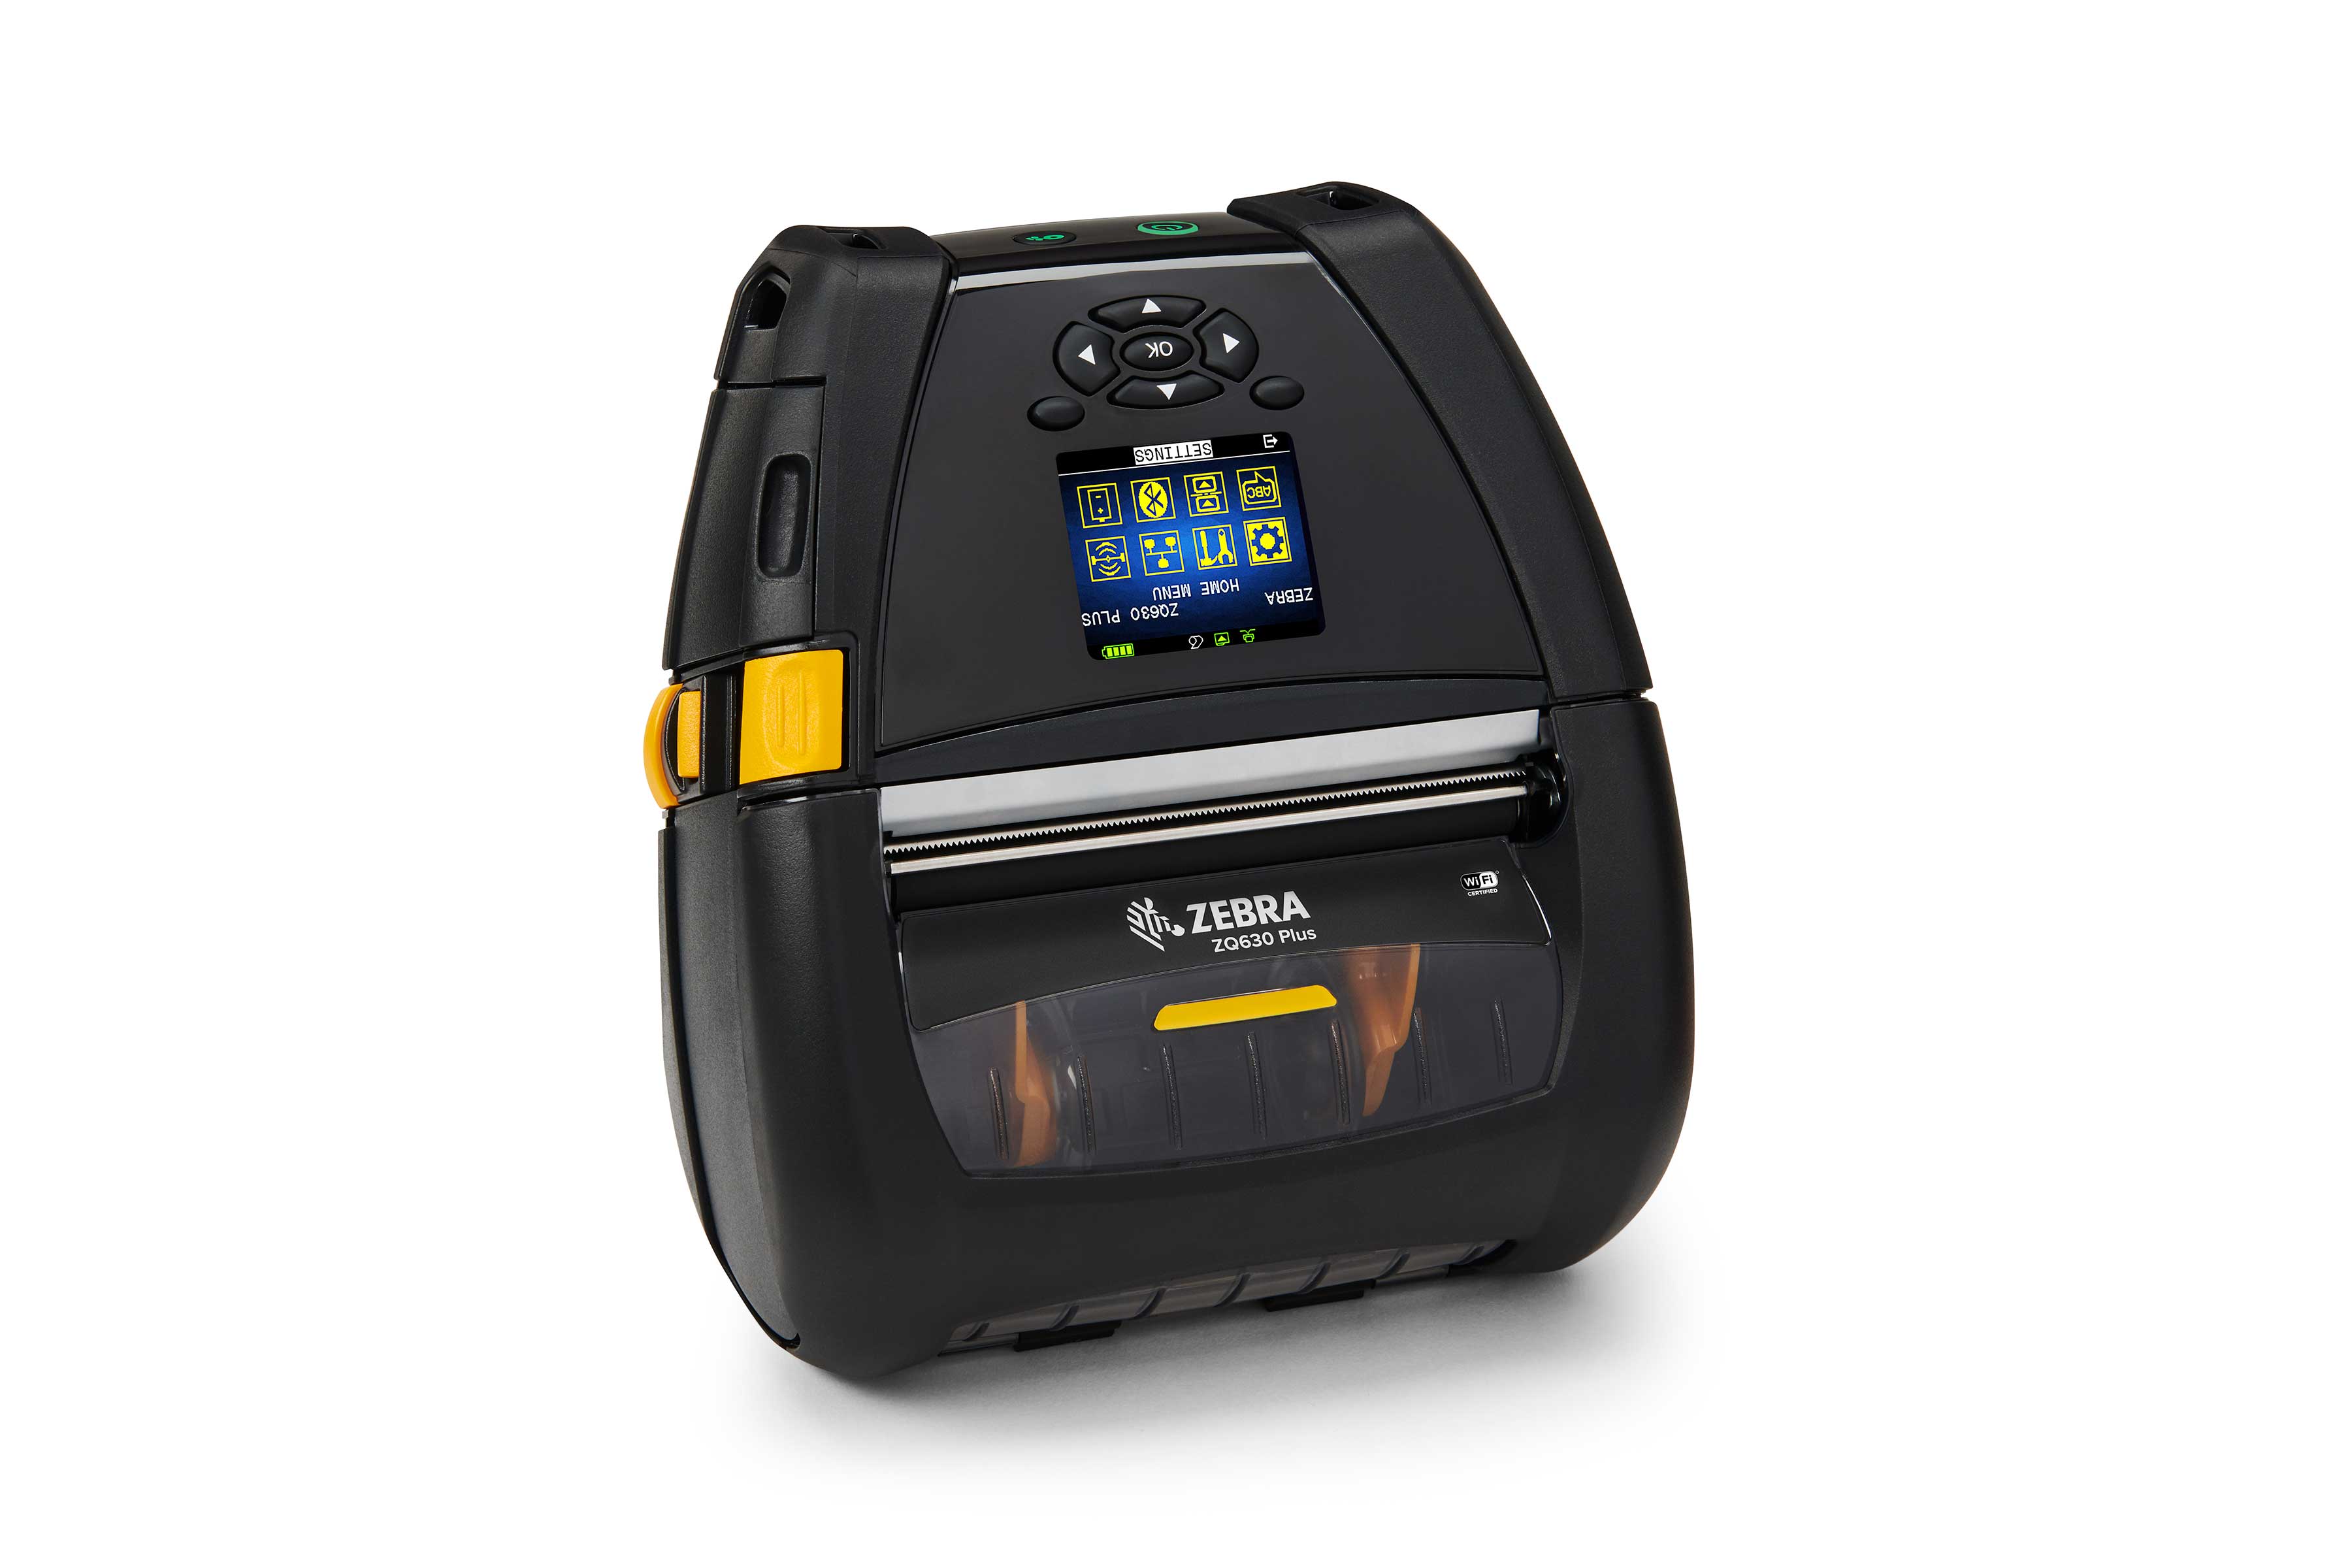 Front view of a Zebra ZQ630 mobile printers